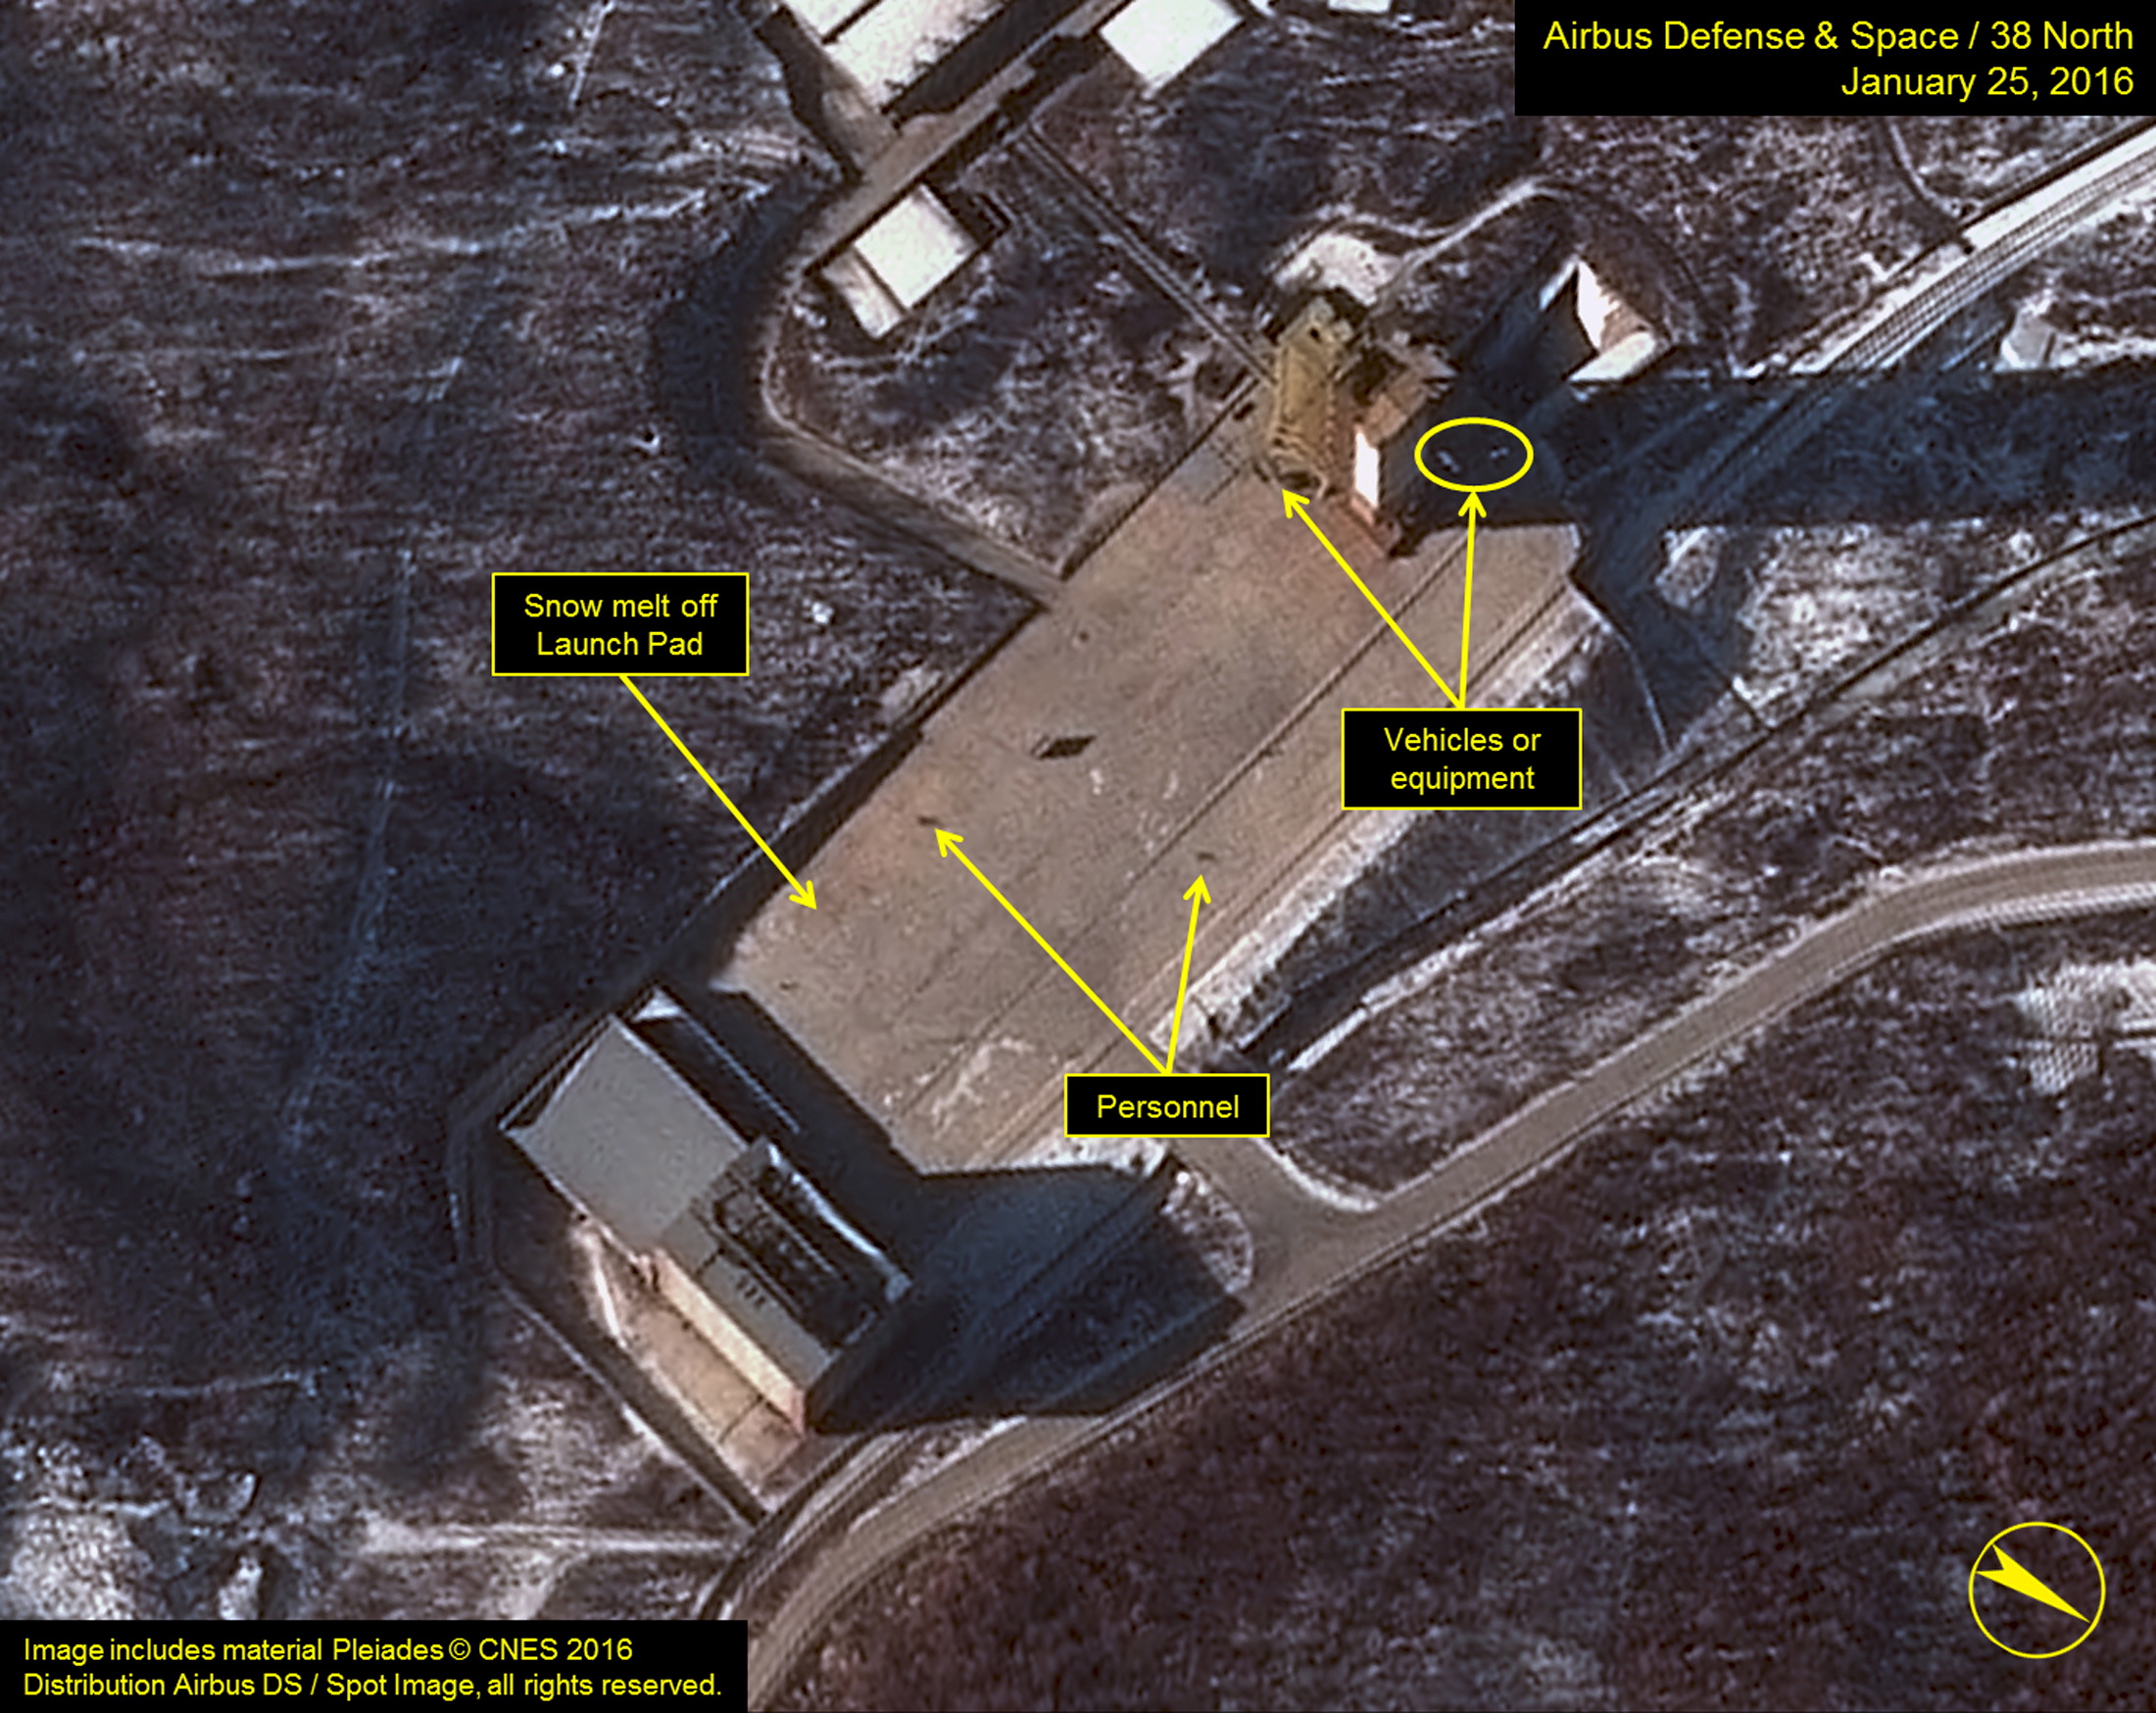 Airbus Defense &amp; Space and 38 North satellite image shows three objects at the base of the gantry tower that are either vehicles or equipment at Sohae Satellite Launching Station in North Korea